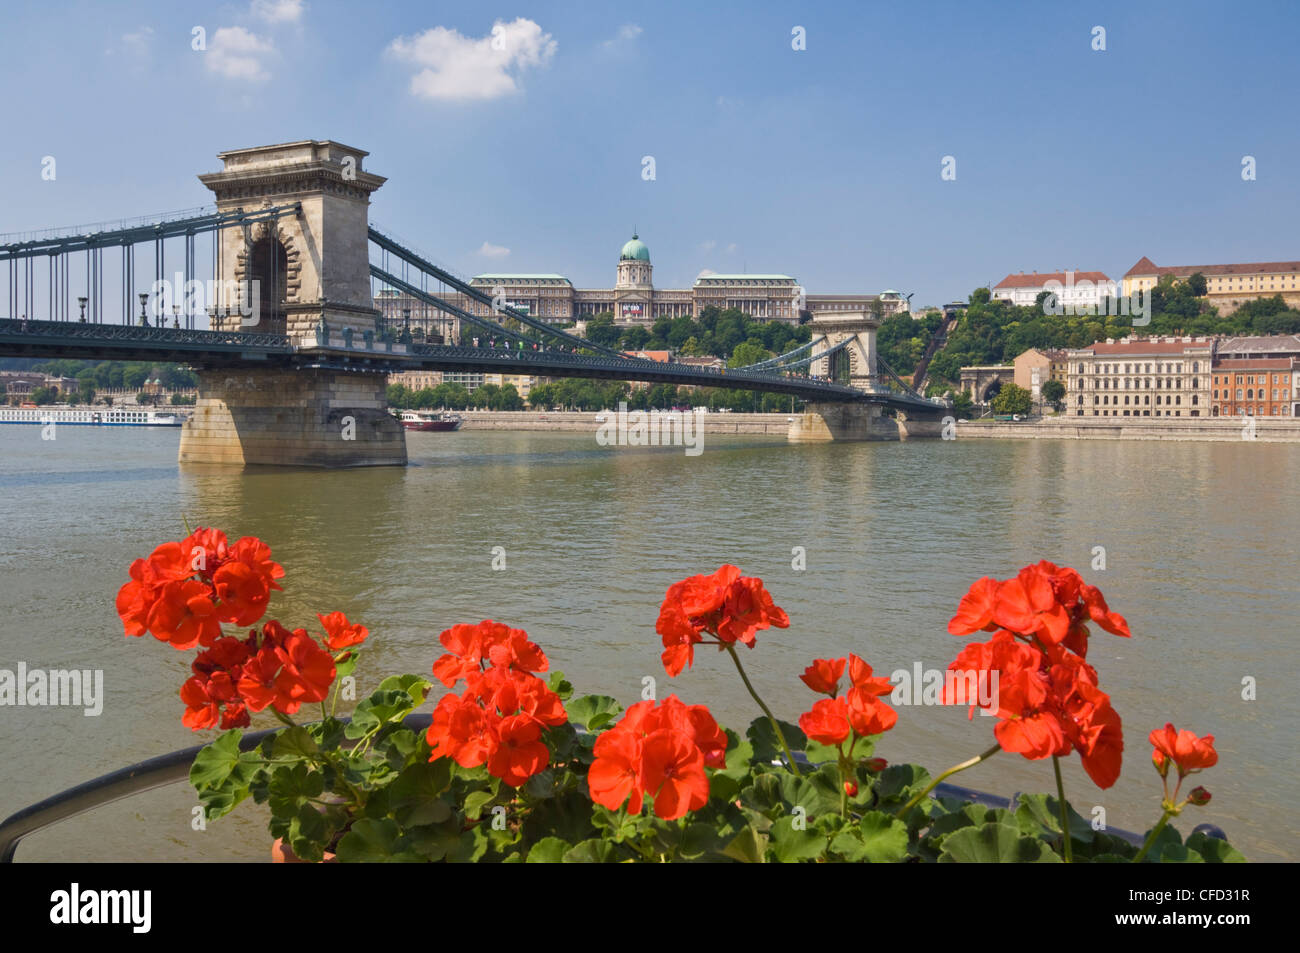 Red geraniums and the Chain Bridge (Szechenyi Lanchid) over the River Danube, Budapest, Hungary Stock Photo